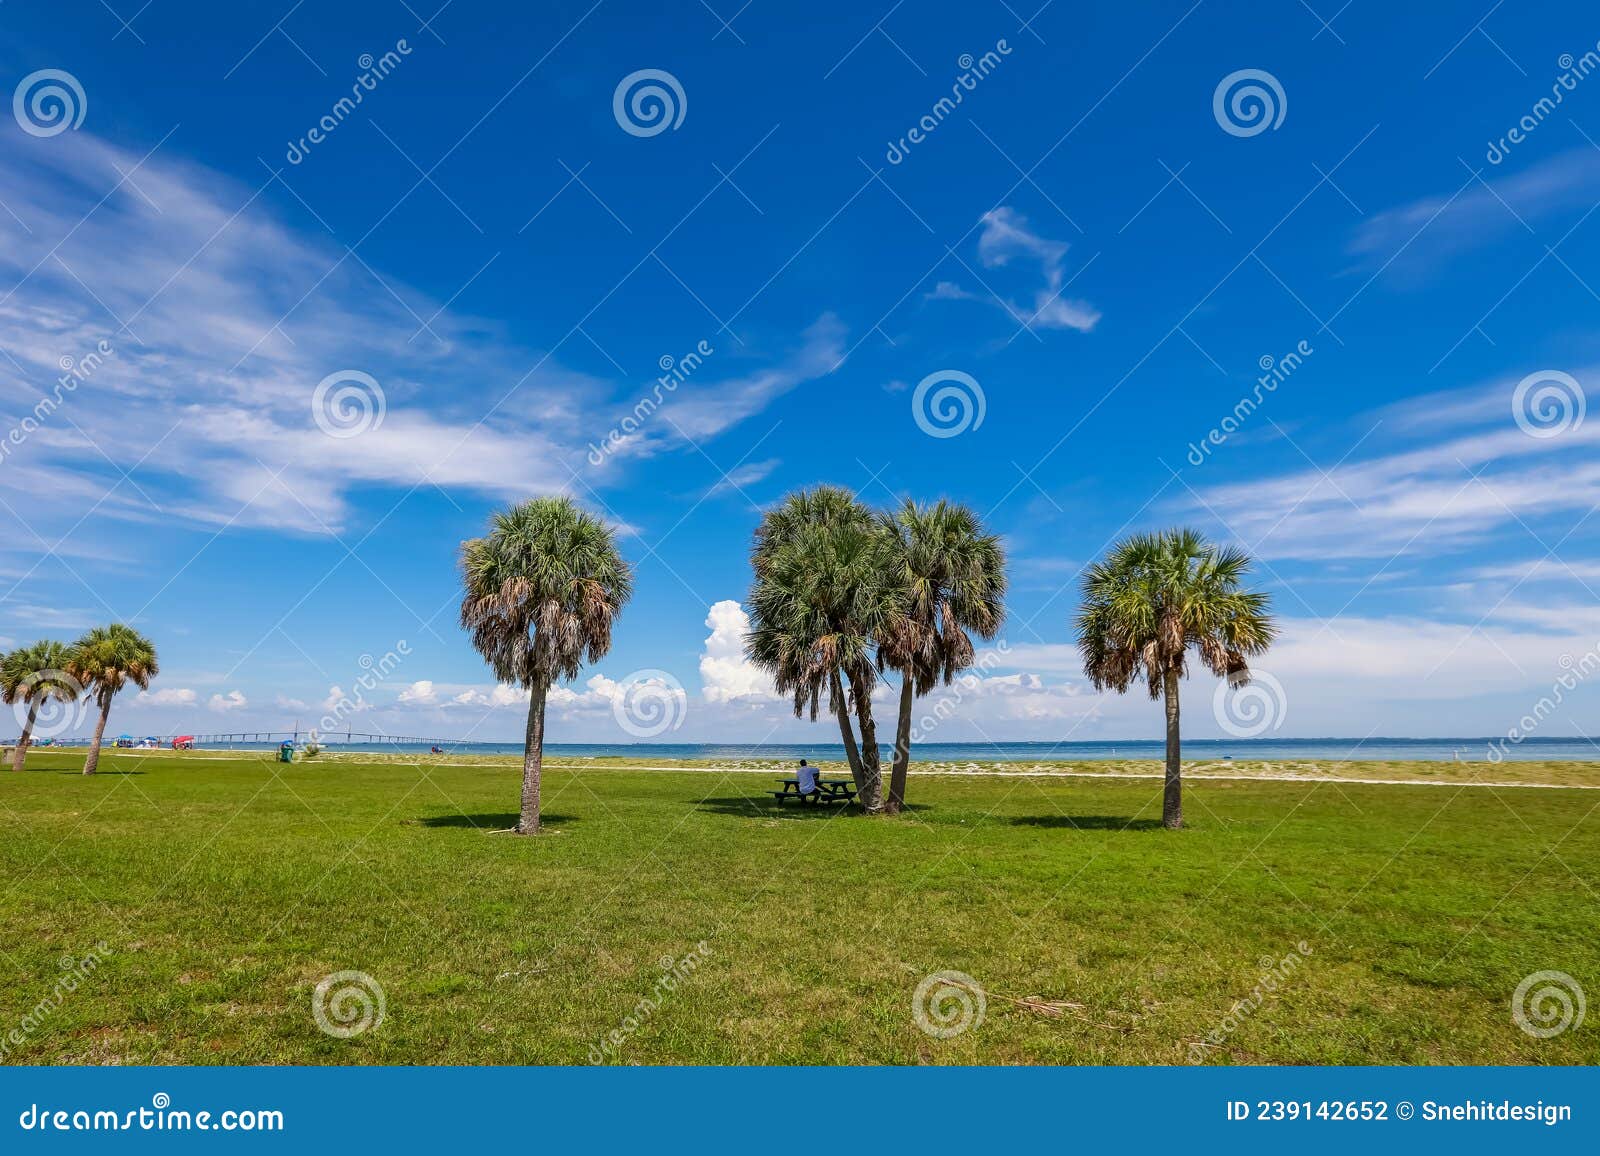 palm trees at fort de soto park in florida, usa